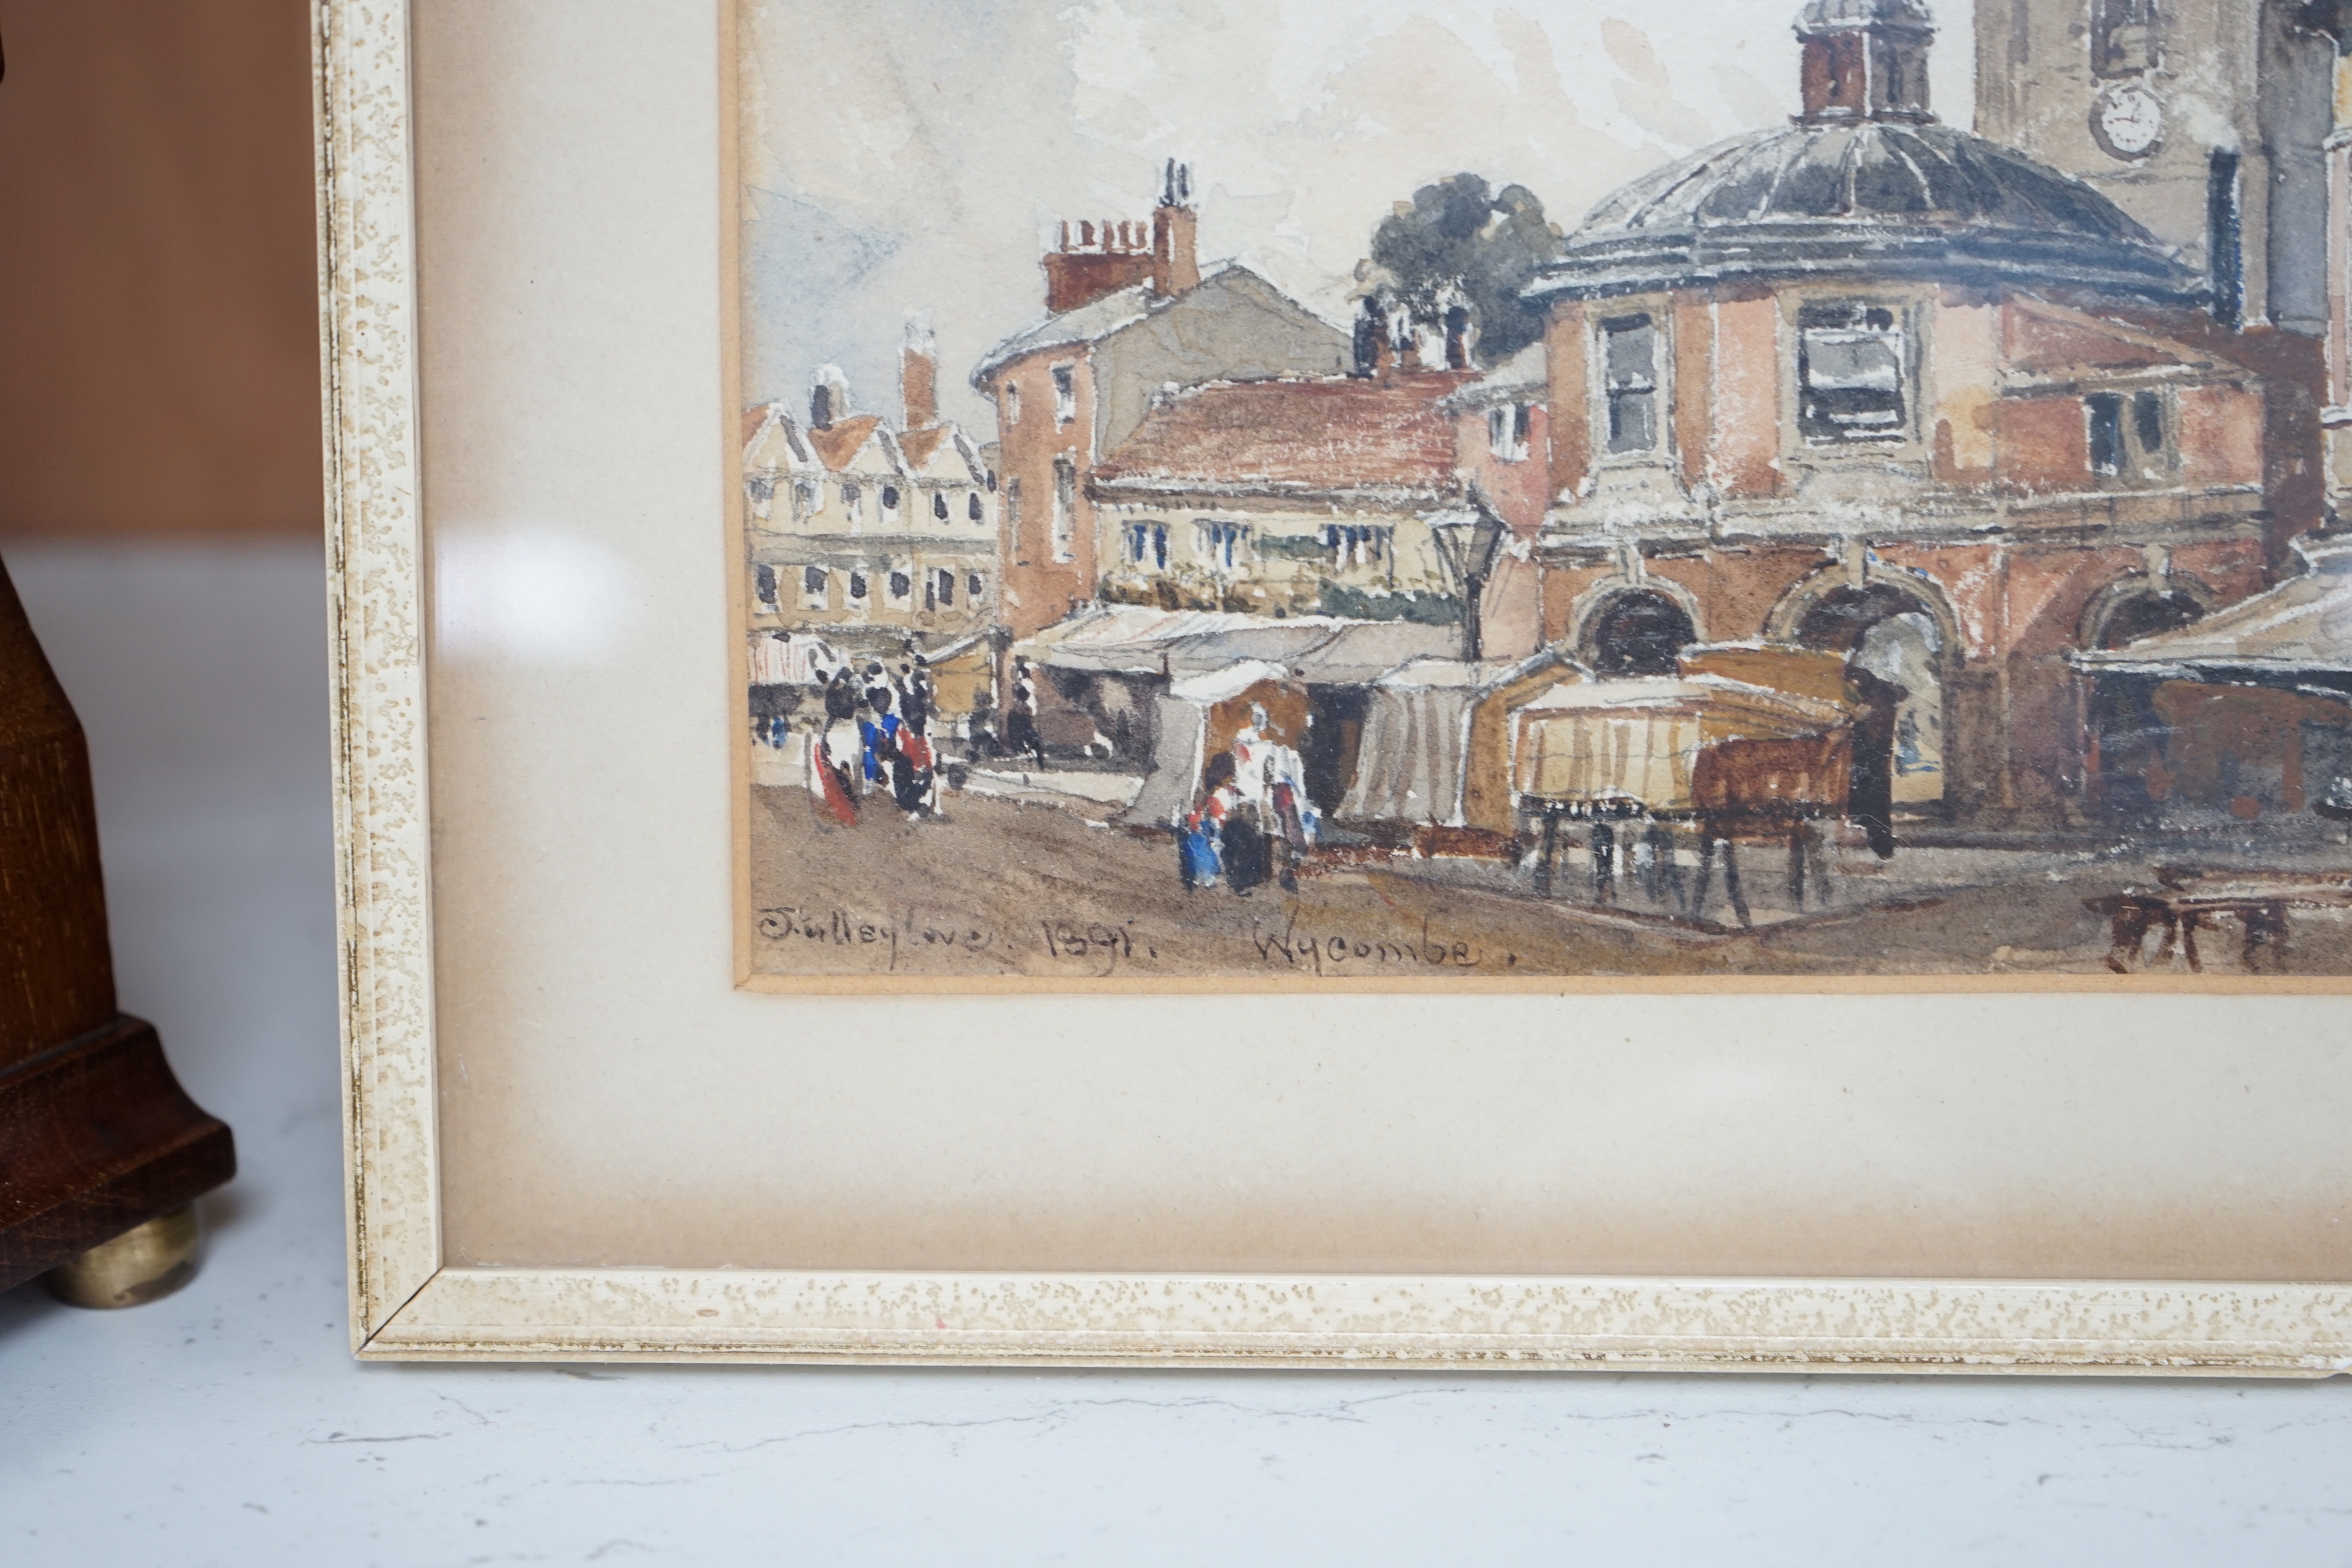 John Fulleylove (1845-1908) watercolour, ‘Wycombe’, signed and dated 1891, 12 x 17cm - Image 3 of 3